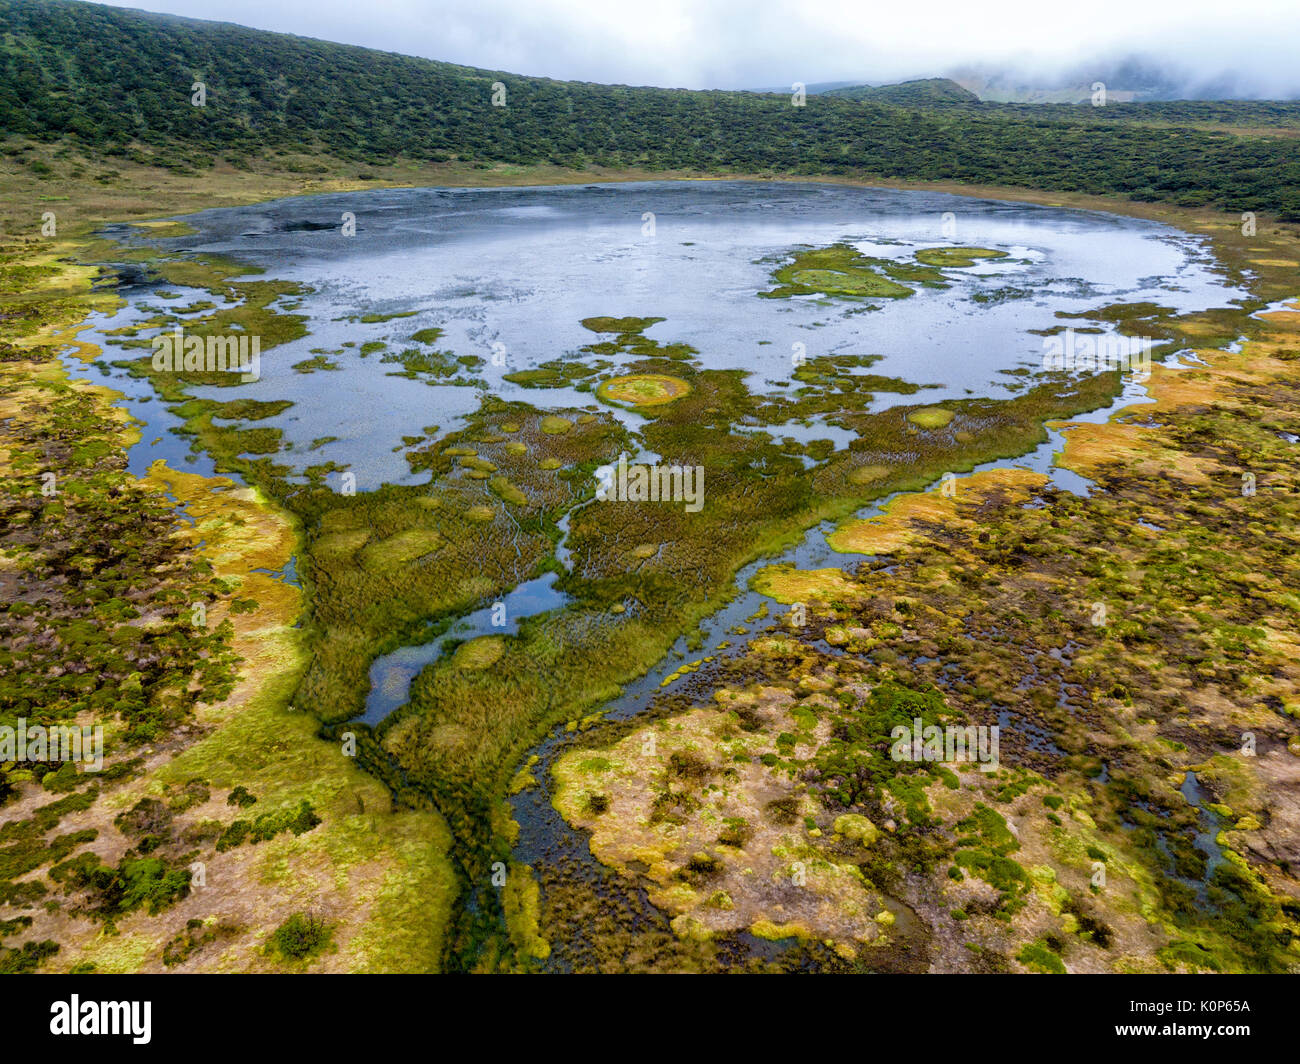 Aerial view of the Caldeira Branca lake on the island of Flores in the Azores. Stock Photo